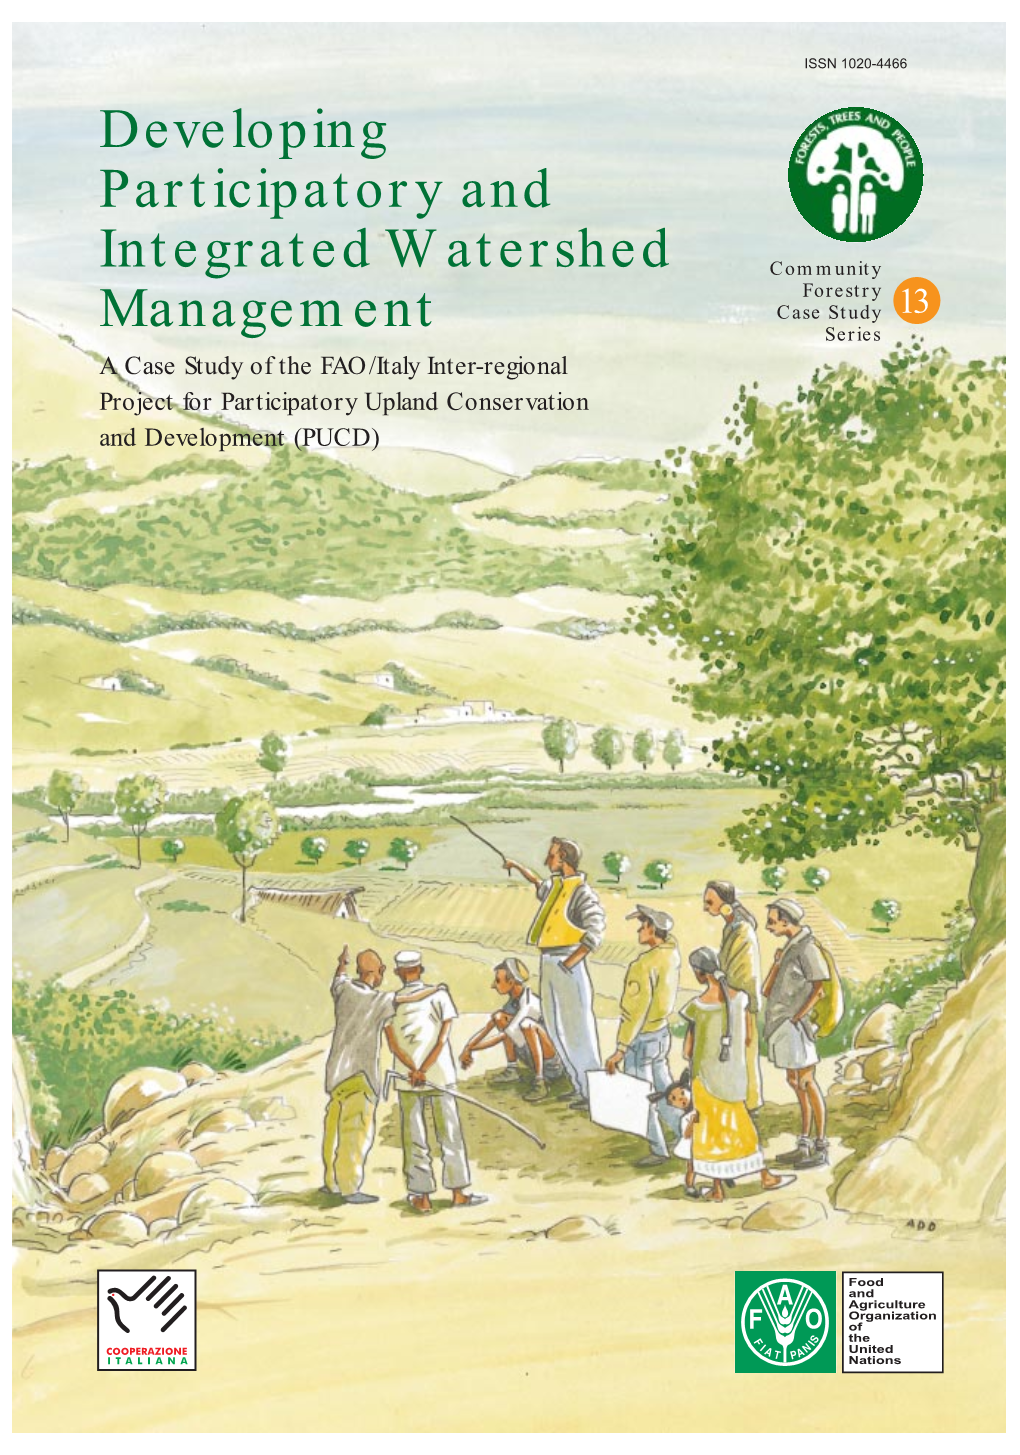 Developing Participatory and Integrated Watershed